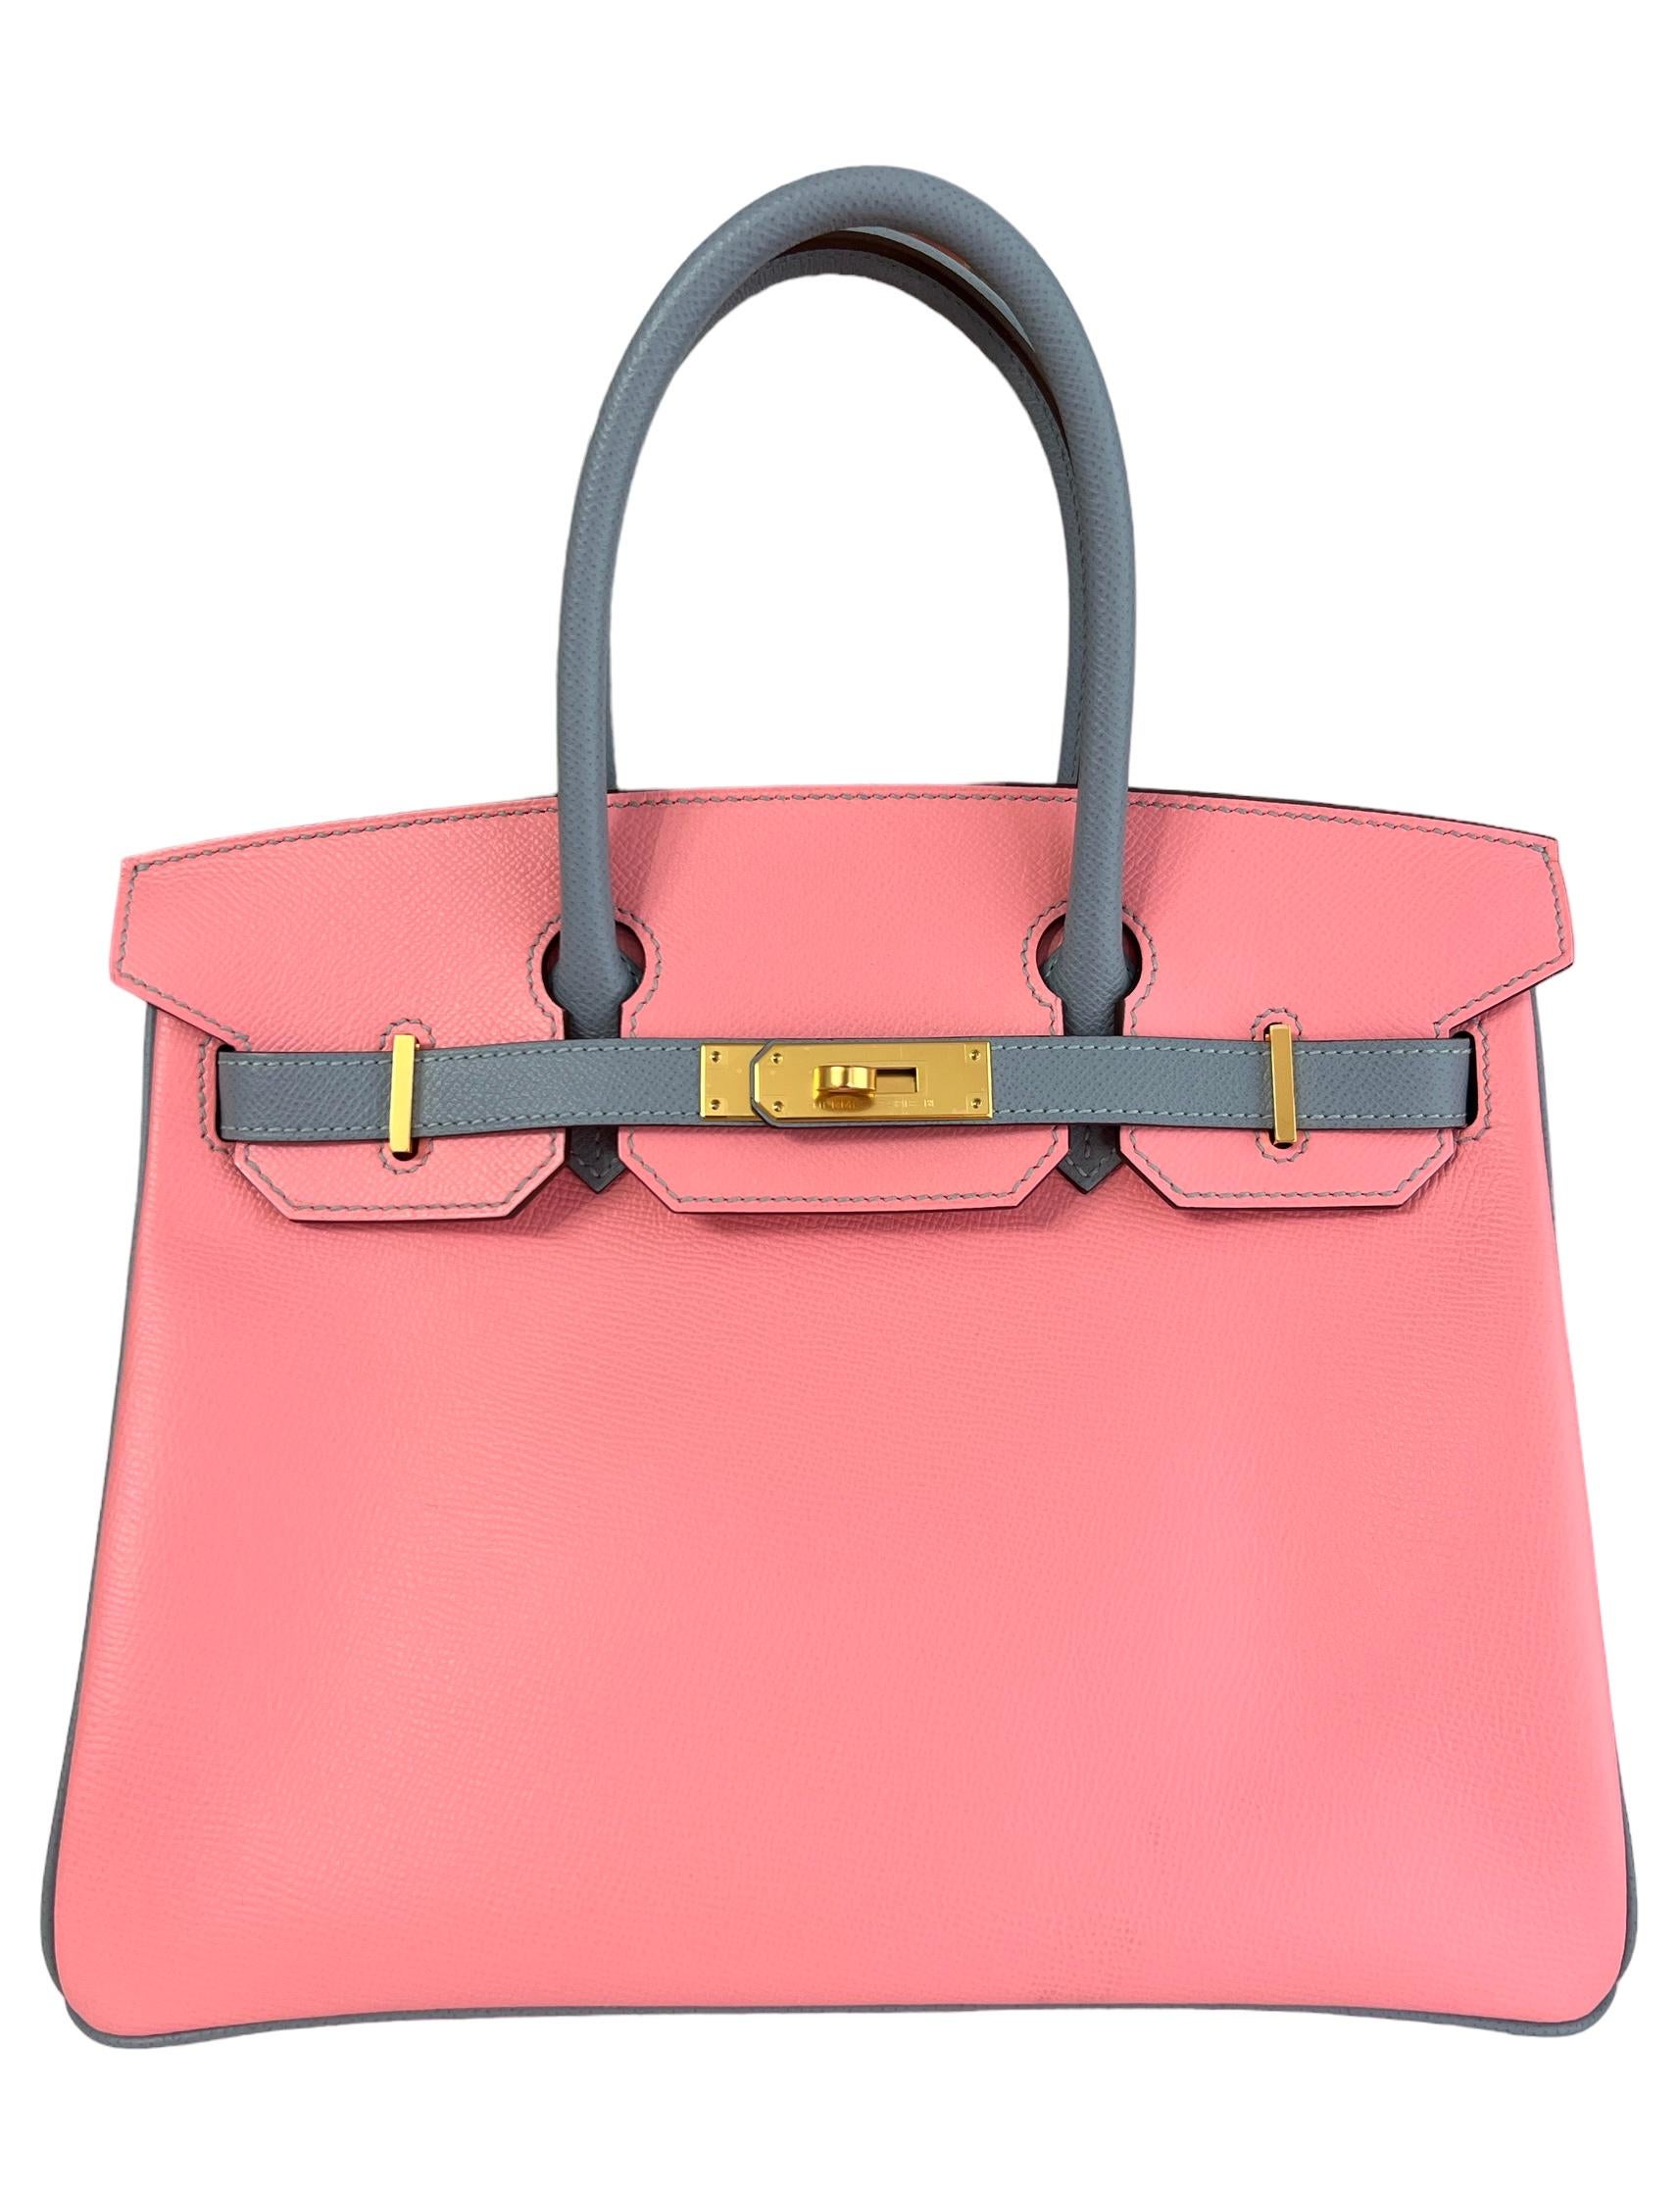 Stunning As New 1 of 1 HSS Special Order Hermes Birkin 30 Pink Rose Confetti & Blue Glacier Epsom Leather complimented by Gold Hardware. From a collectors Closet. As New Z Stamp 2021. Plastic on all Hardware and Feet. 

Shop with confidence from Lux